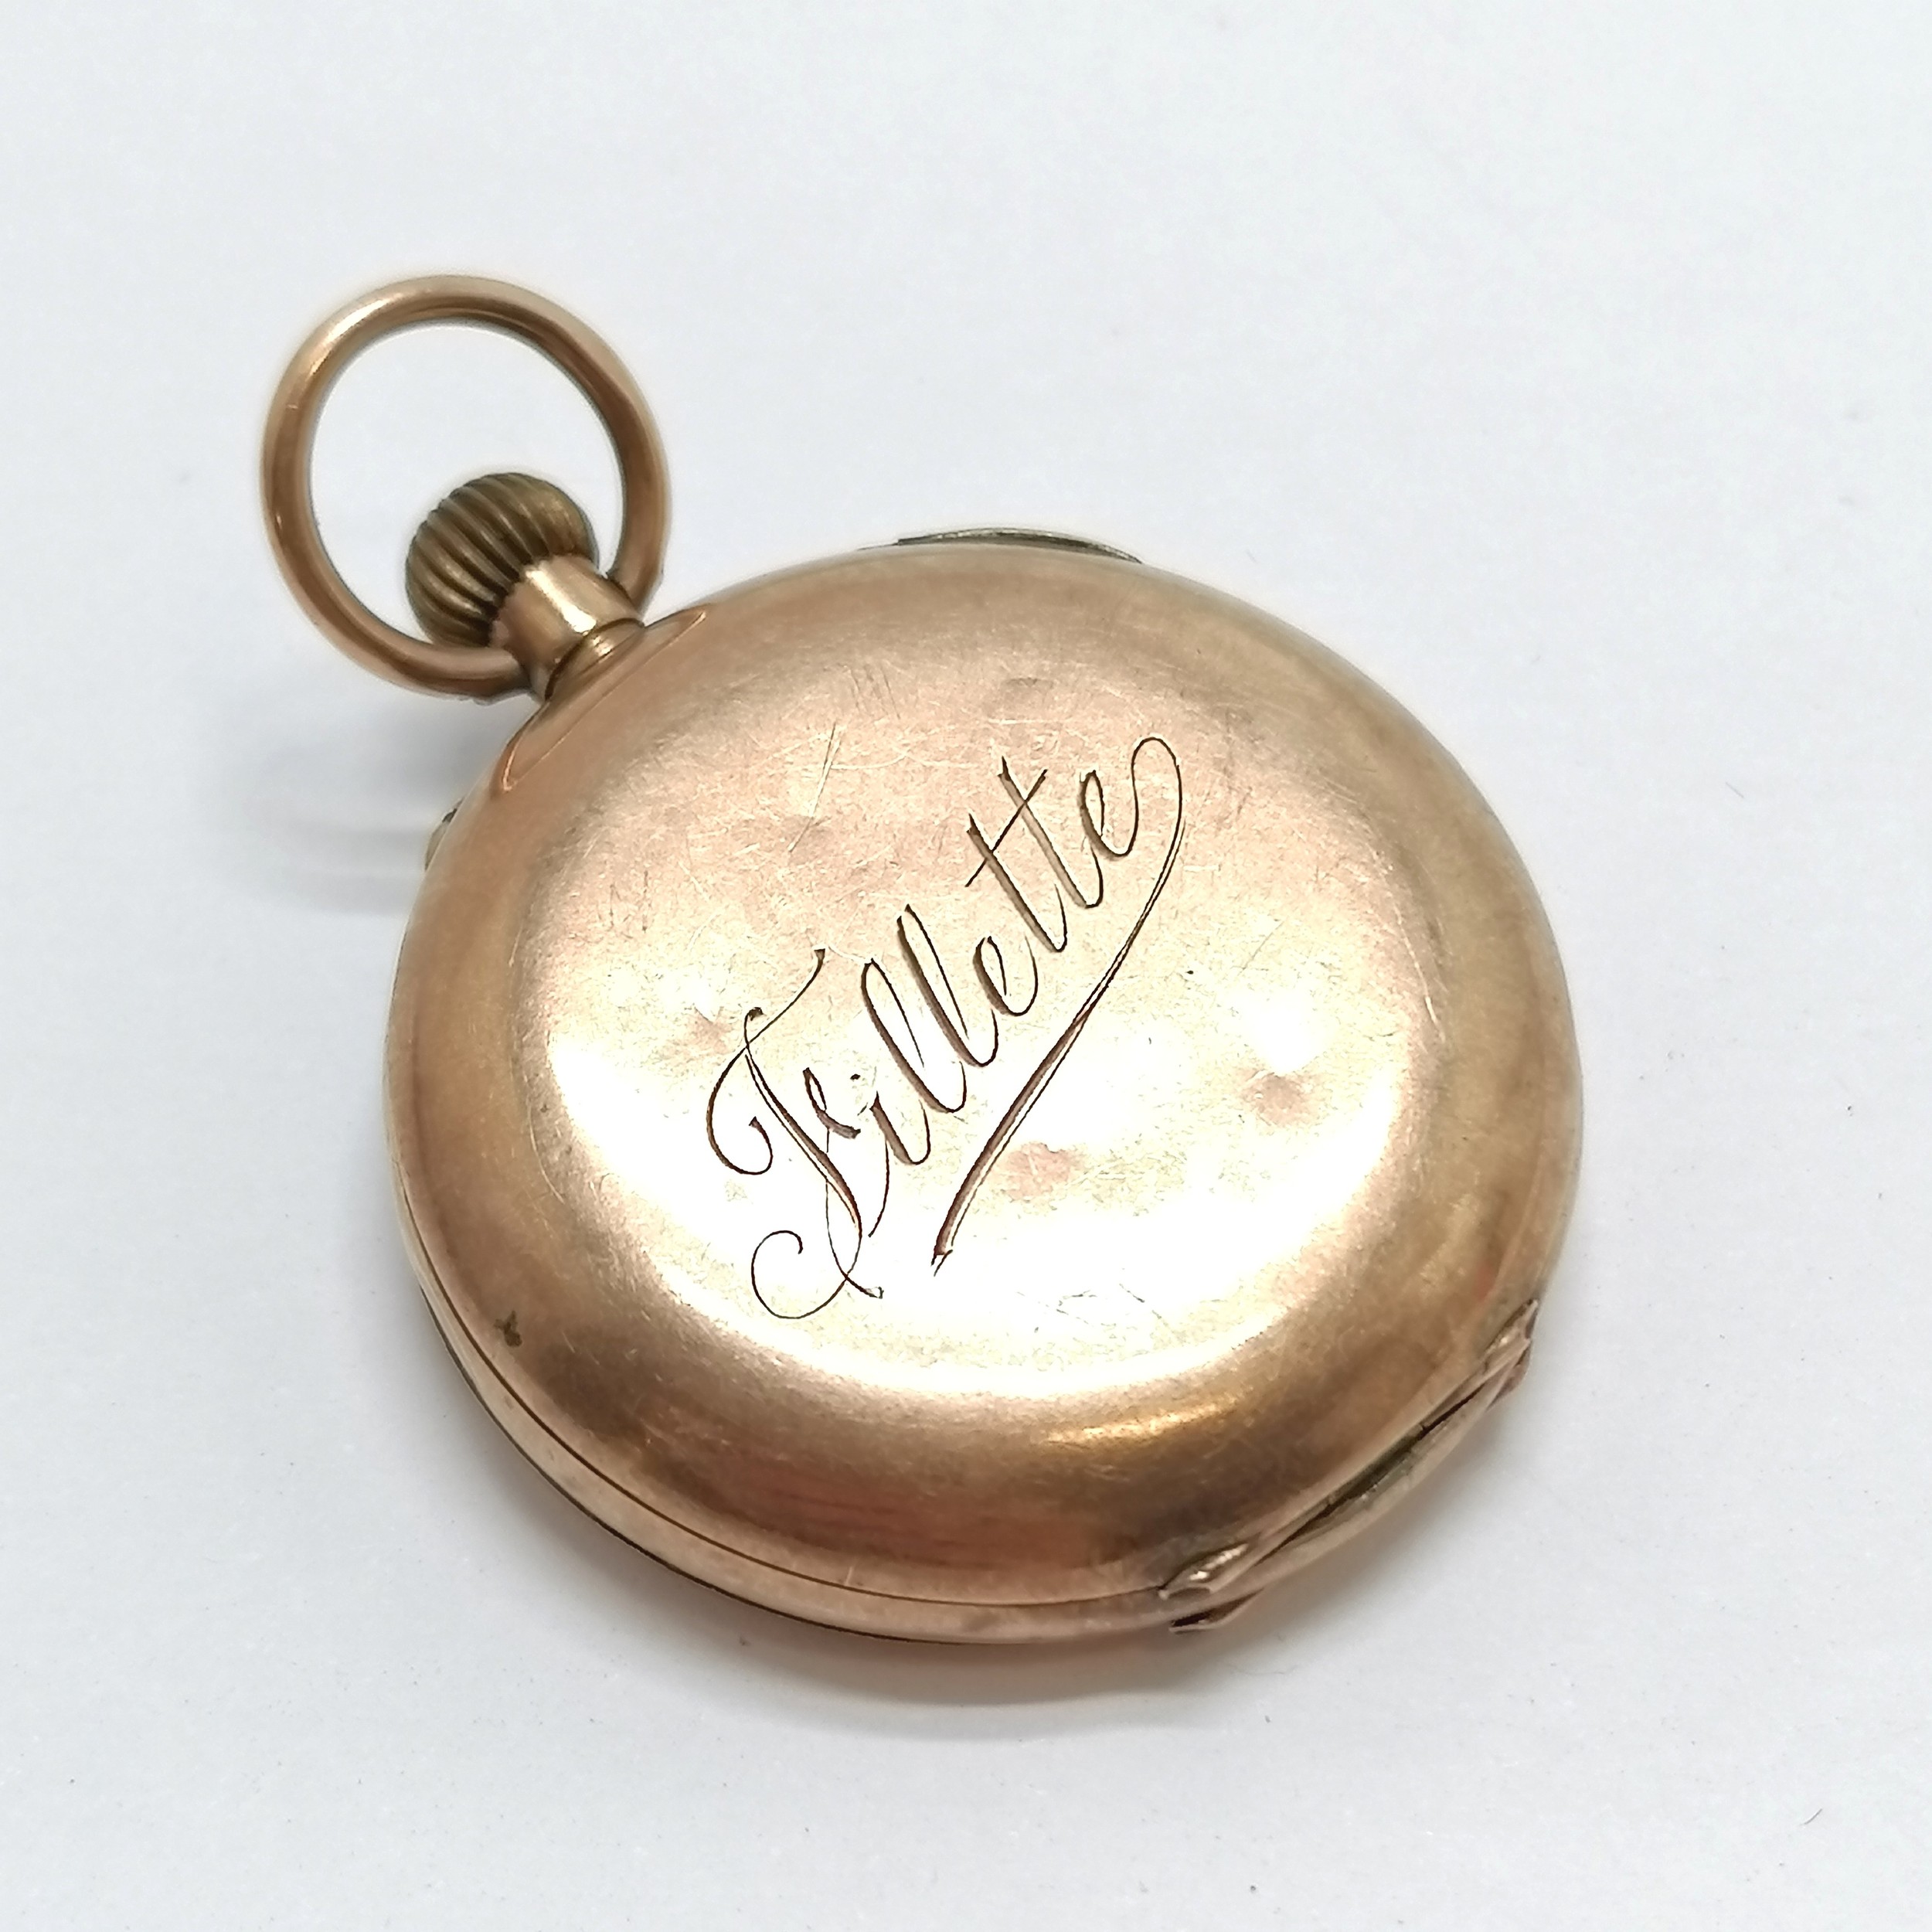 Antique 9ct gold cased pocket fob watch (30mm case and has gold inner dust cover ) - 24.2g total - Image 3 of 3